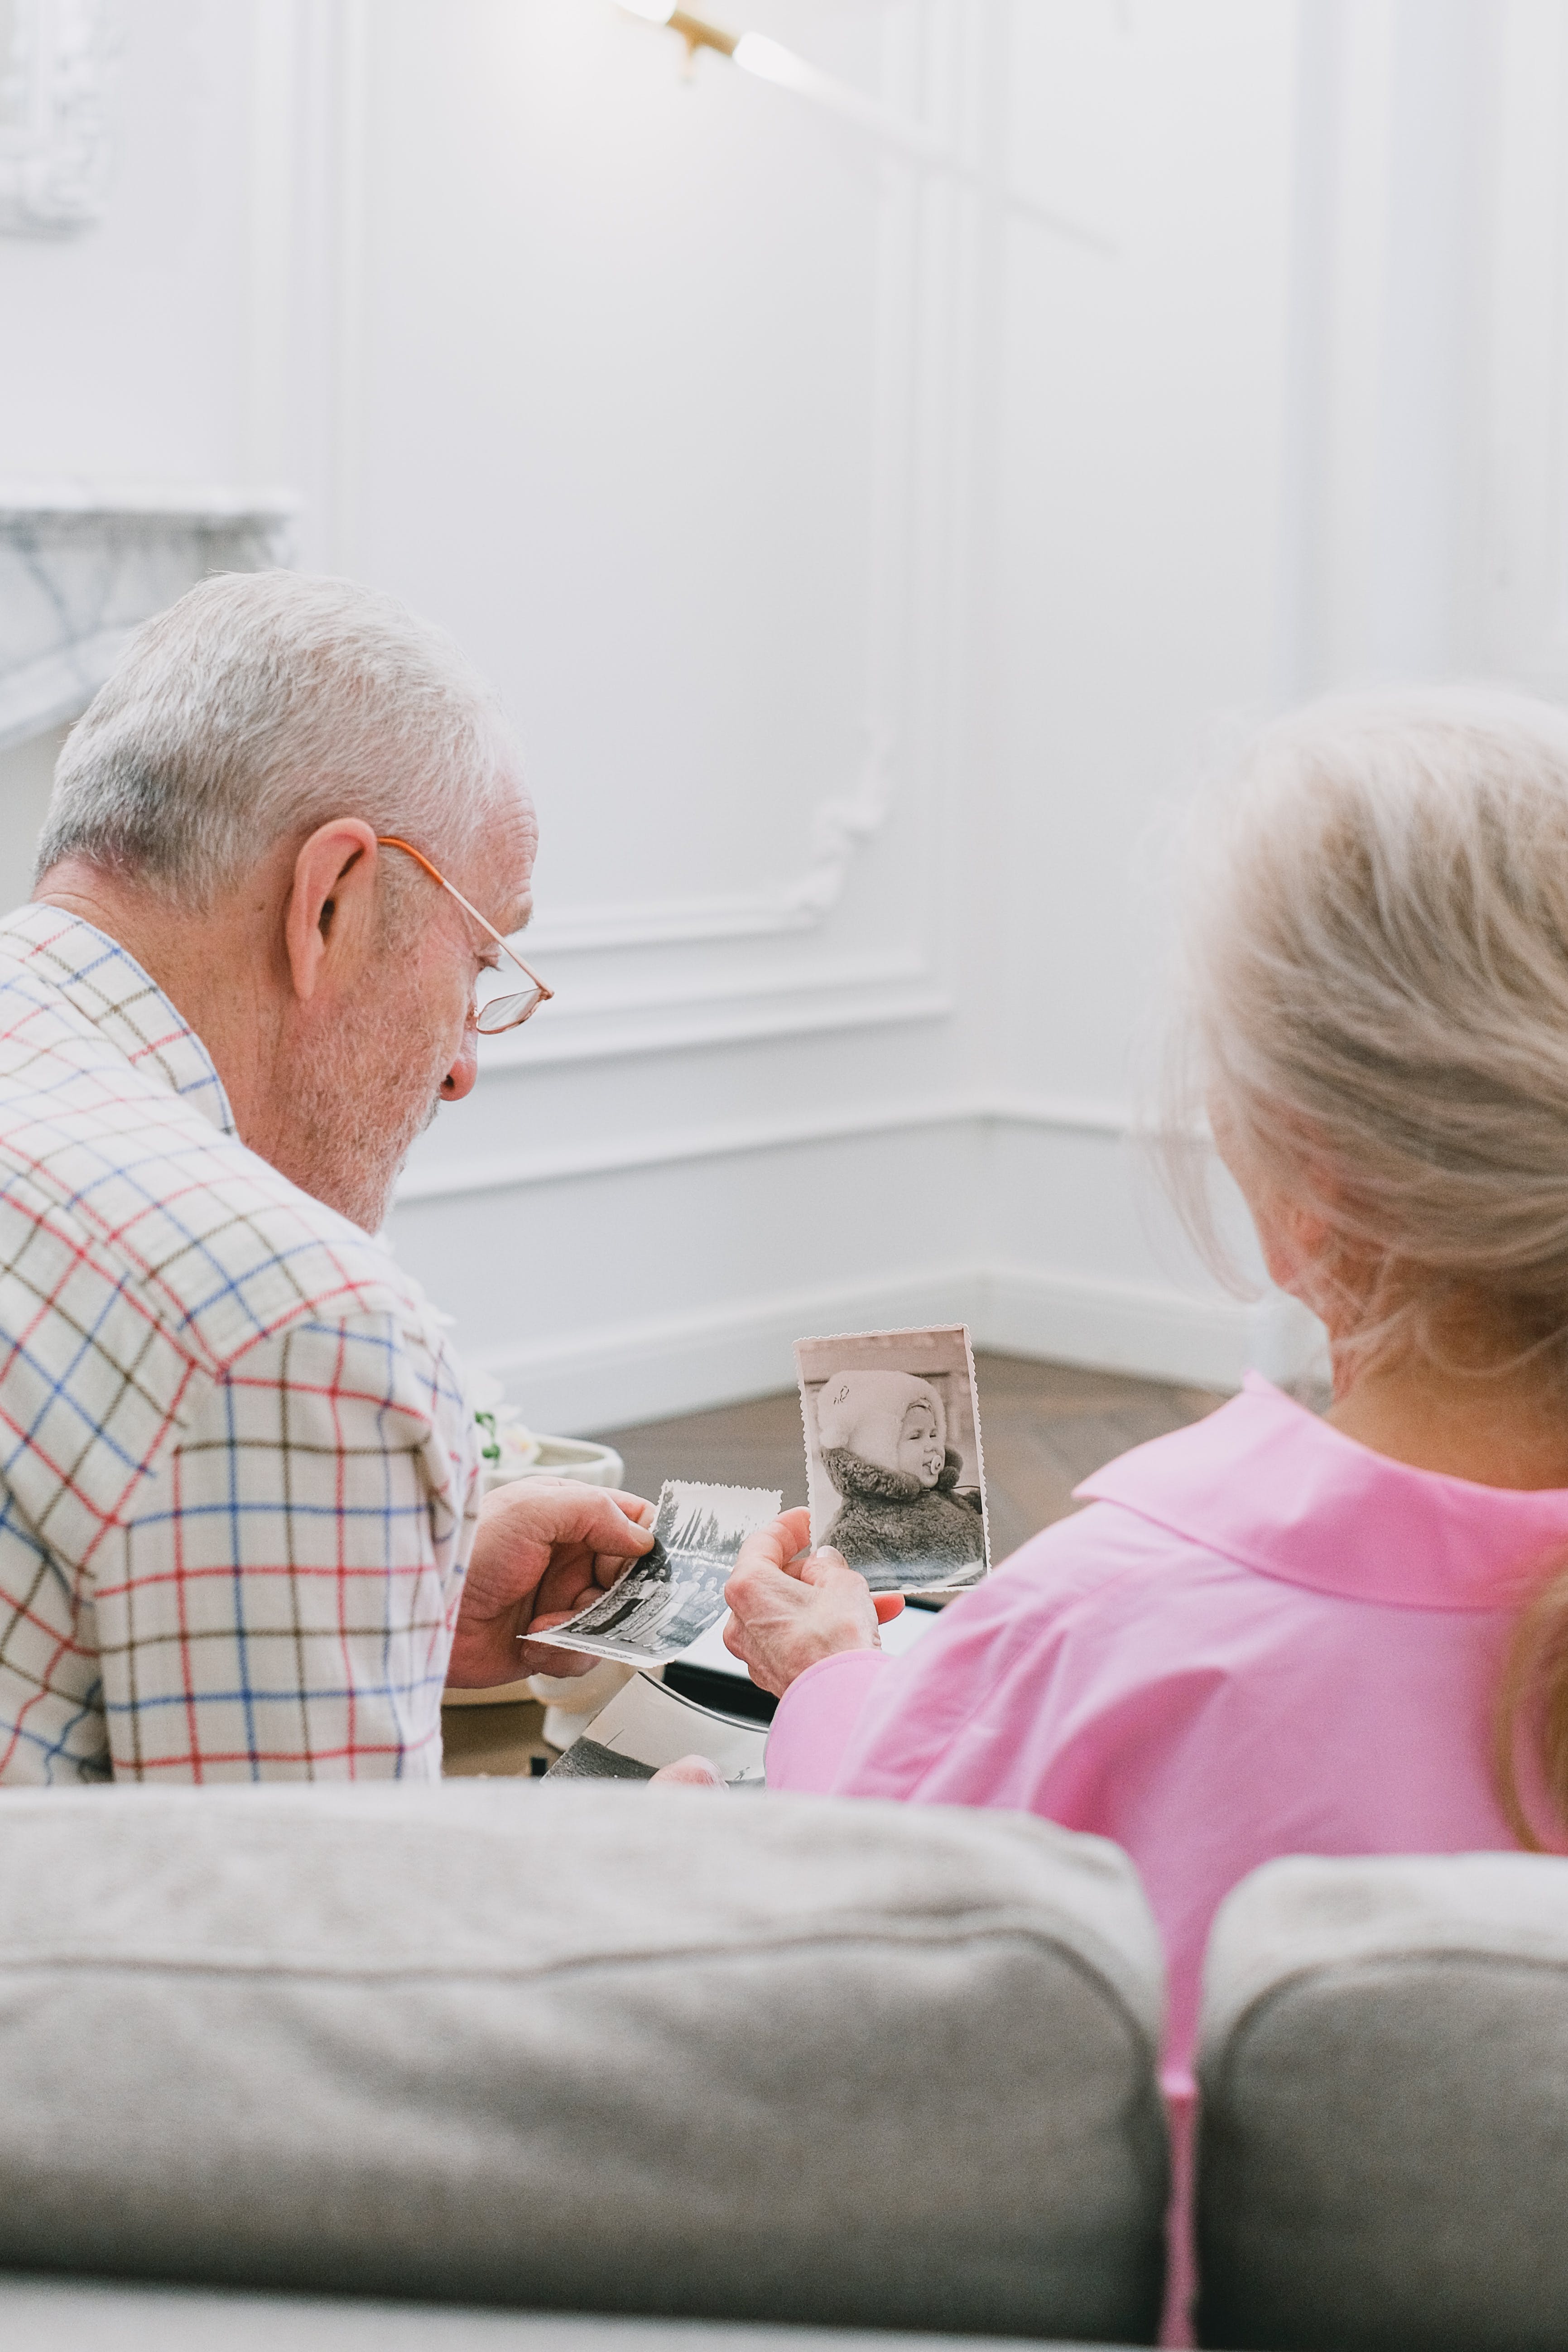 An elderly couple looking at photographs together | Source: Pexels